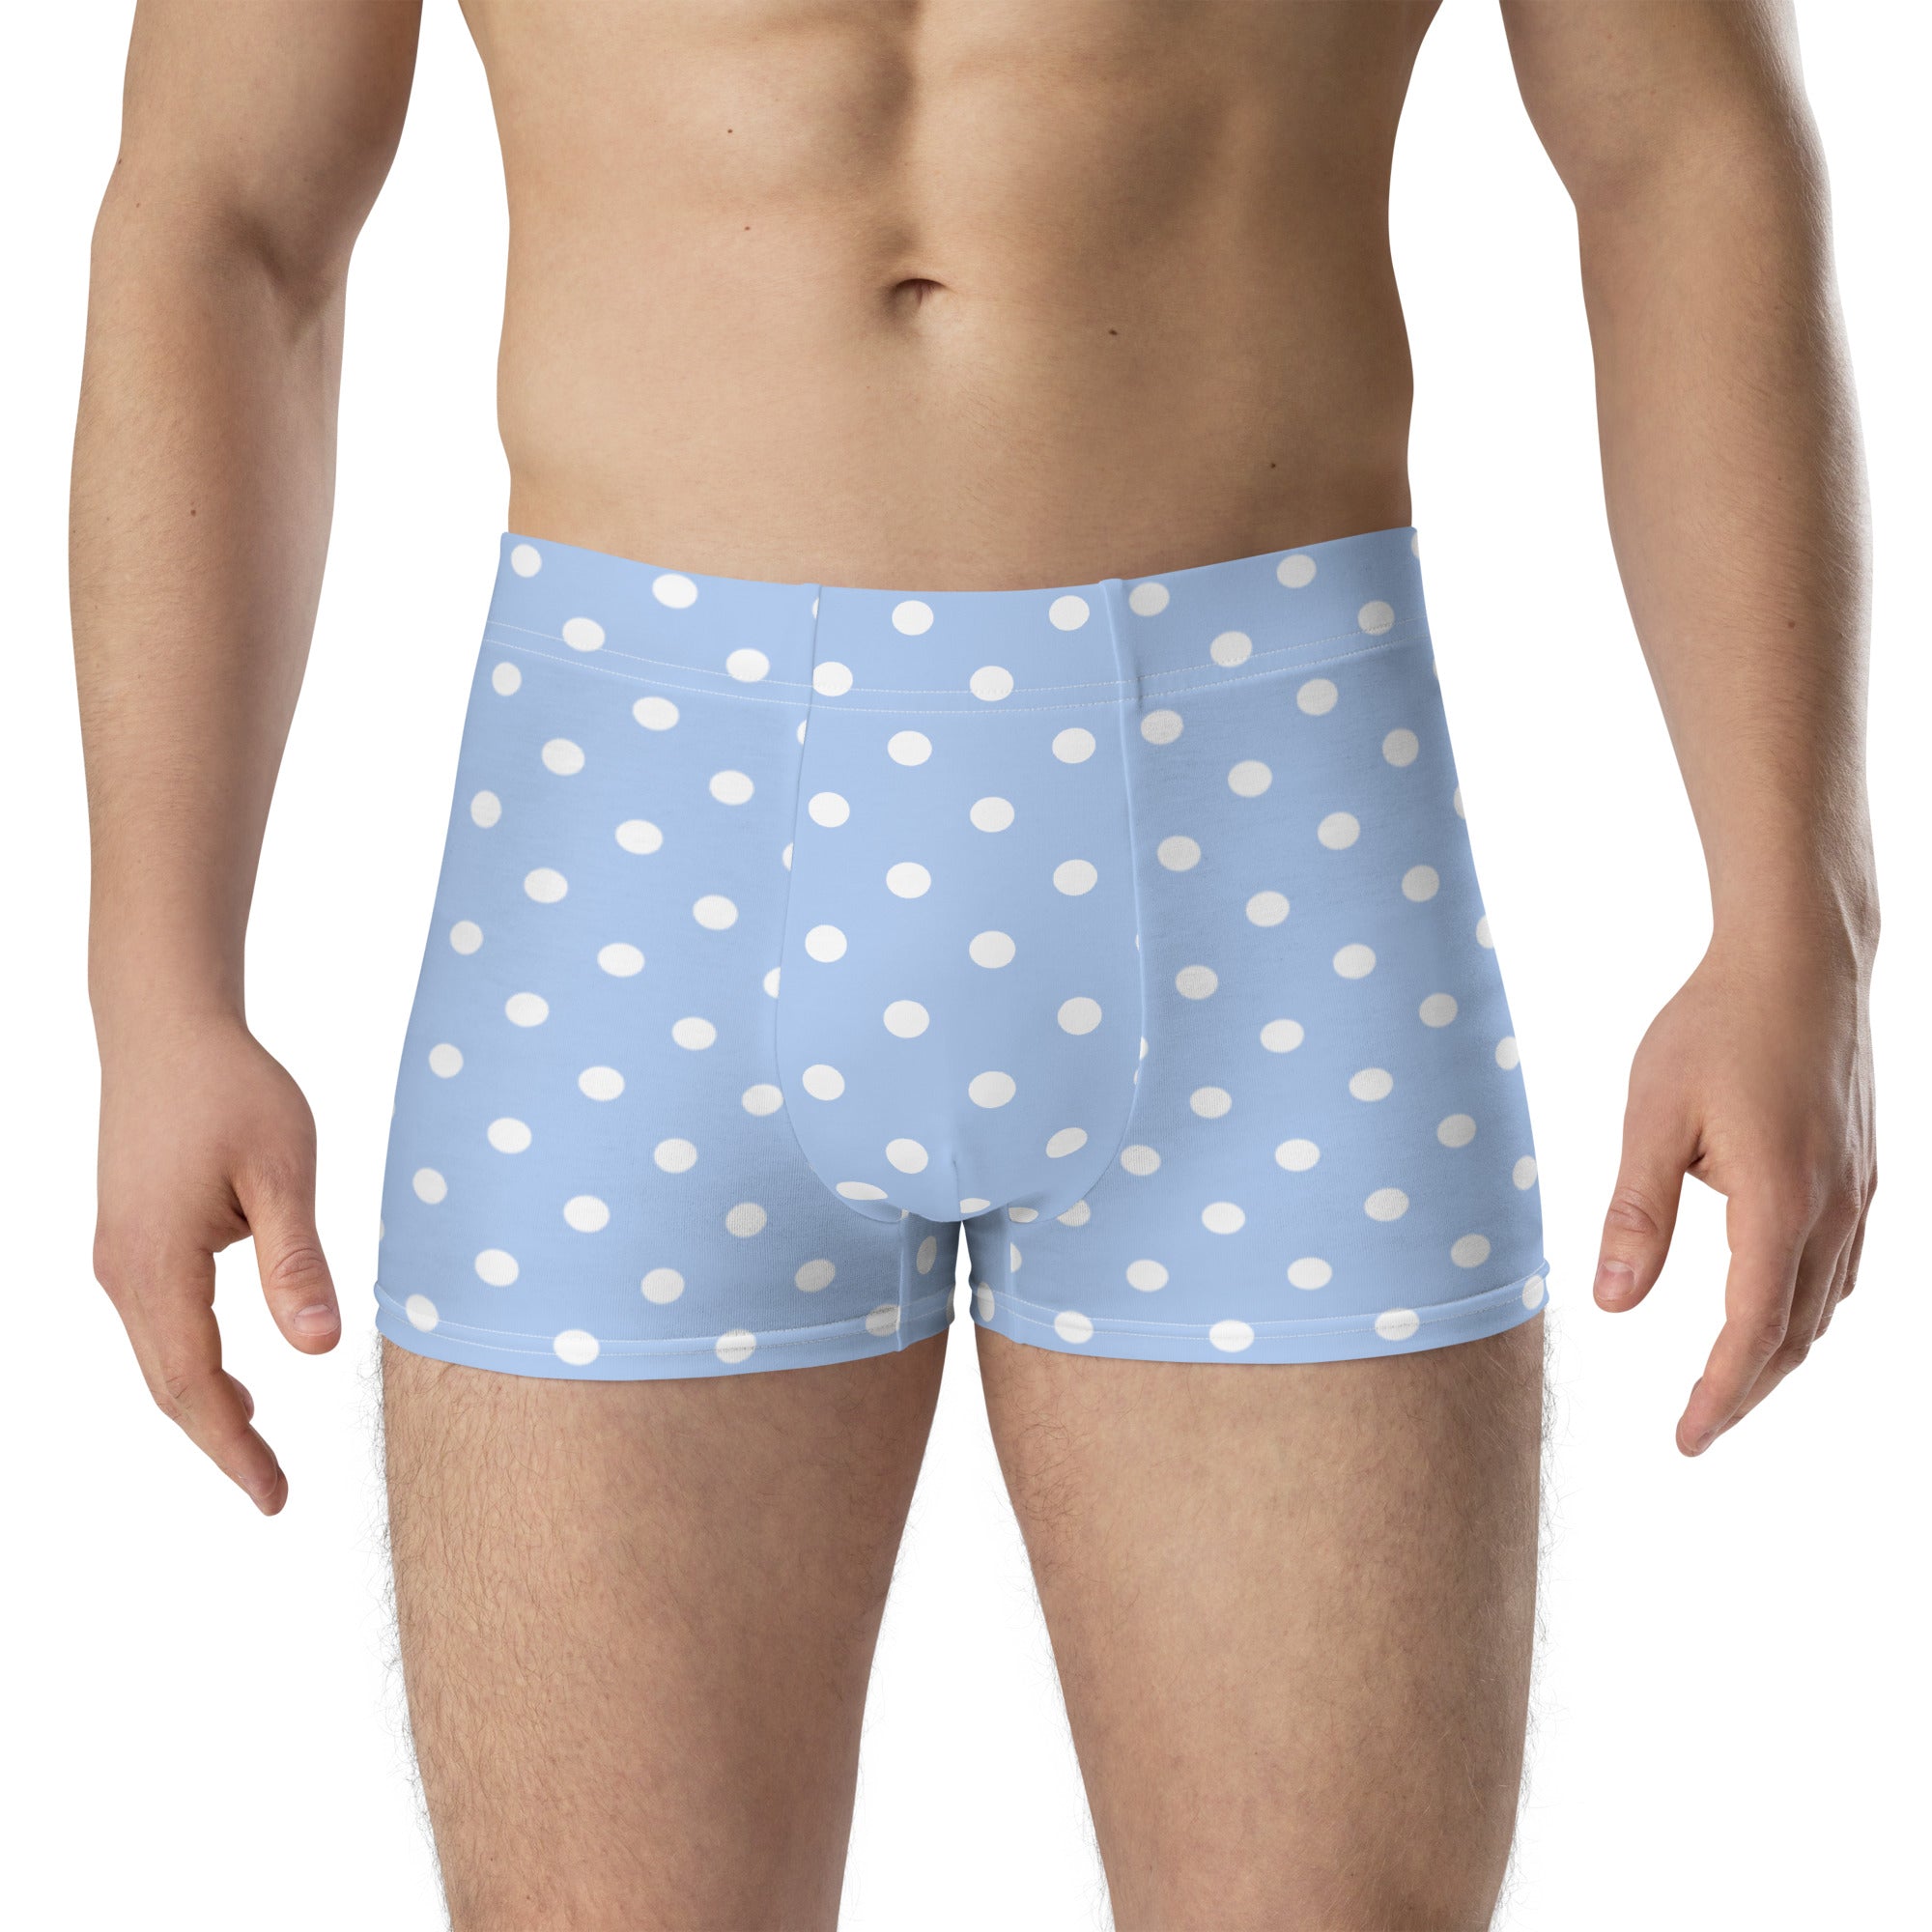 Stylish and breathable sky blue boxers for men